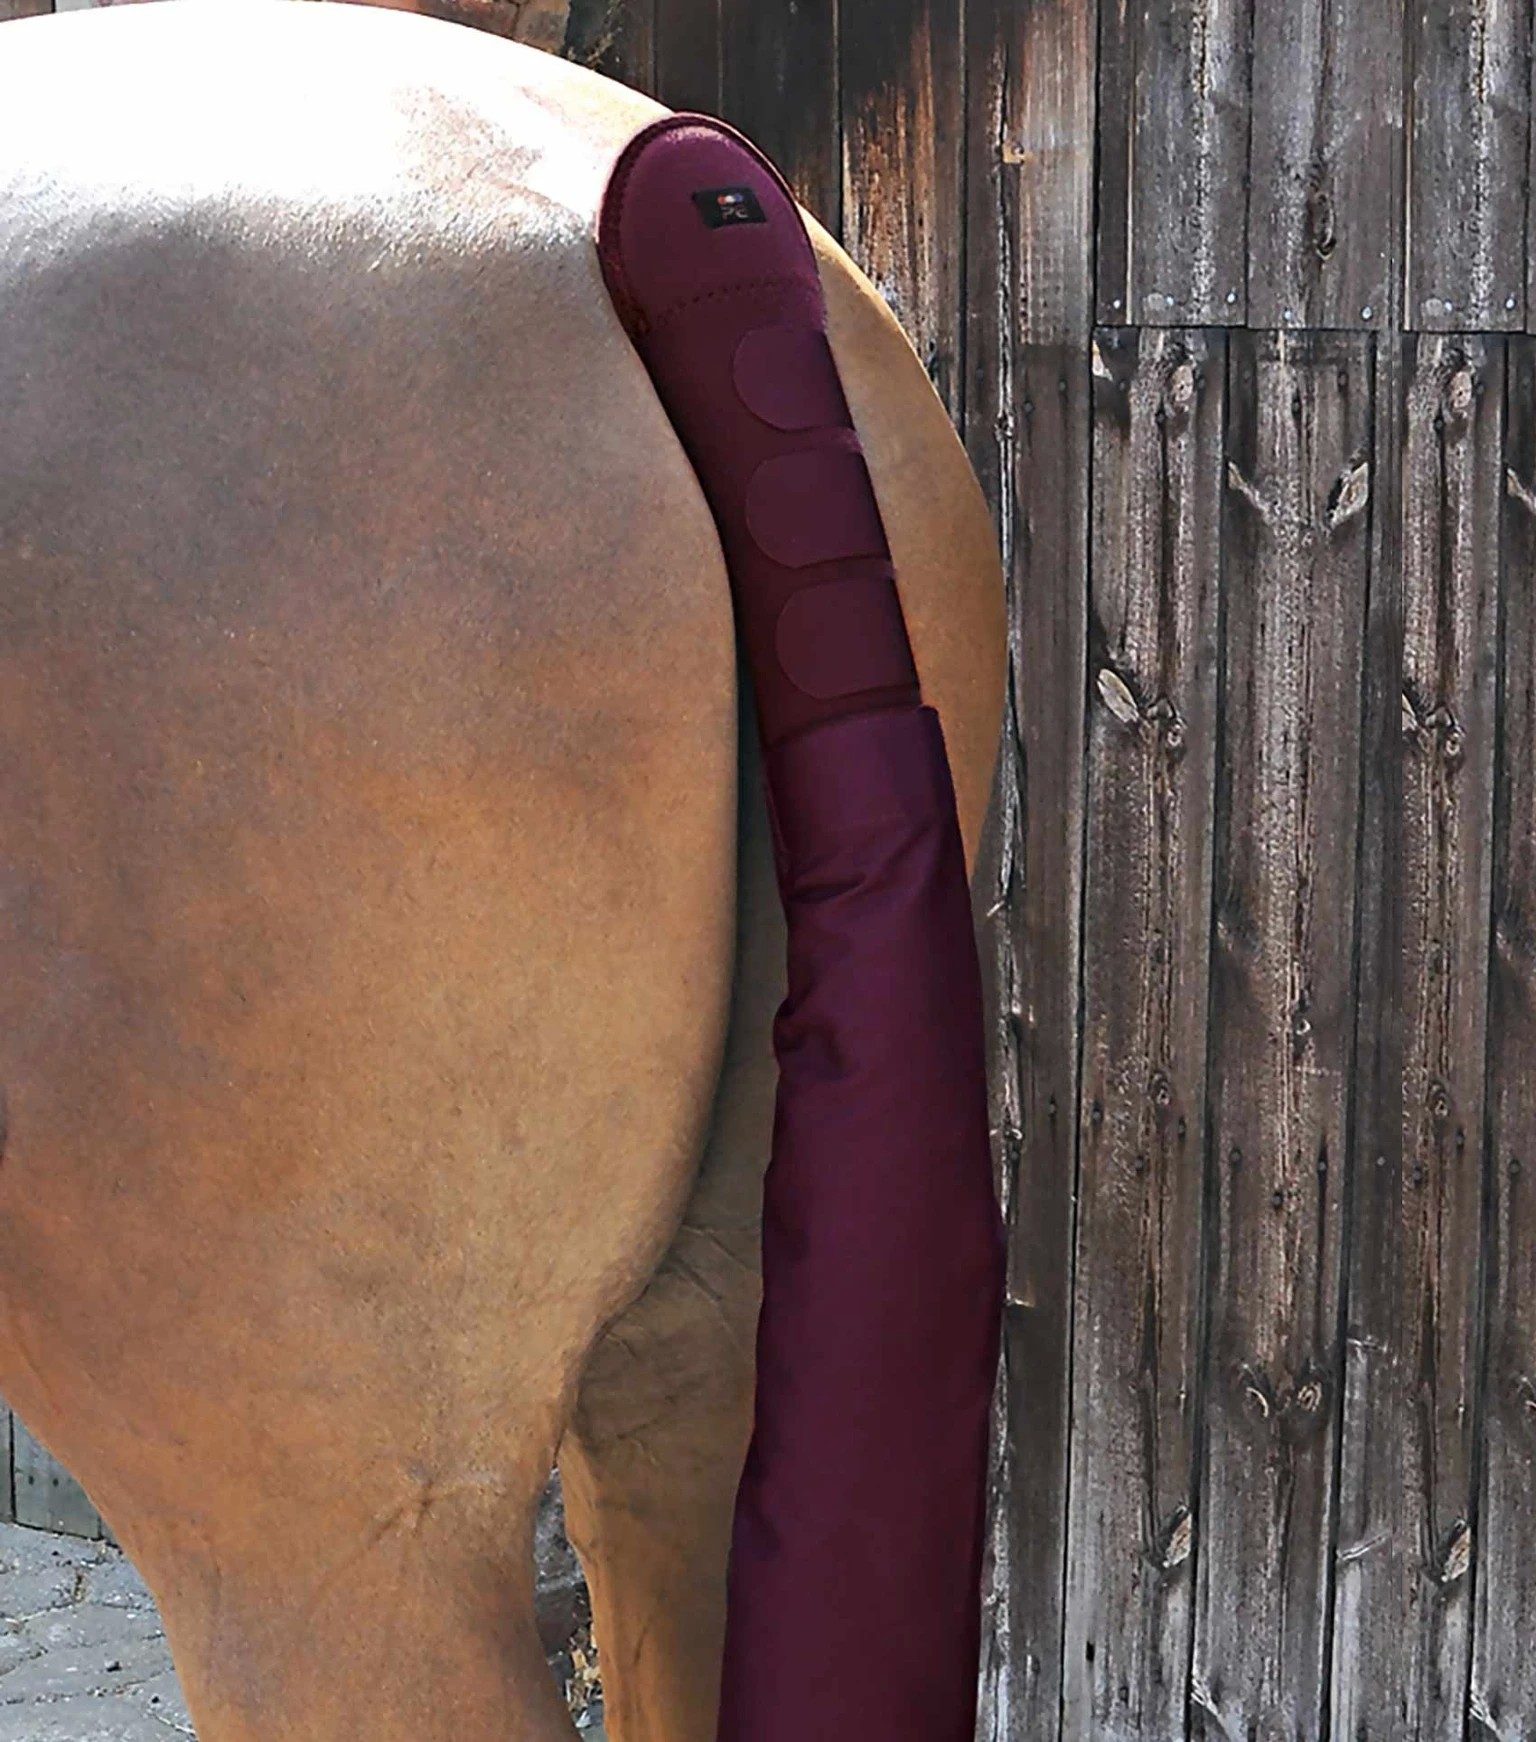 P.E PADDED HORSE TAIL GUARD WITH BAG